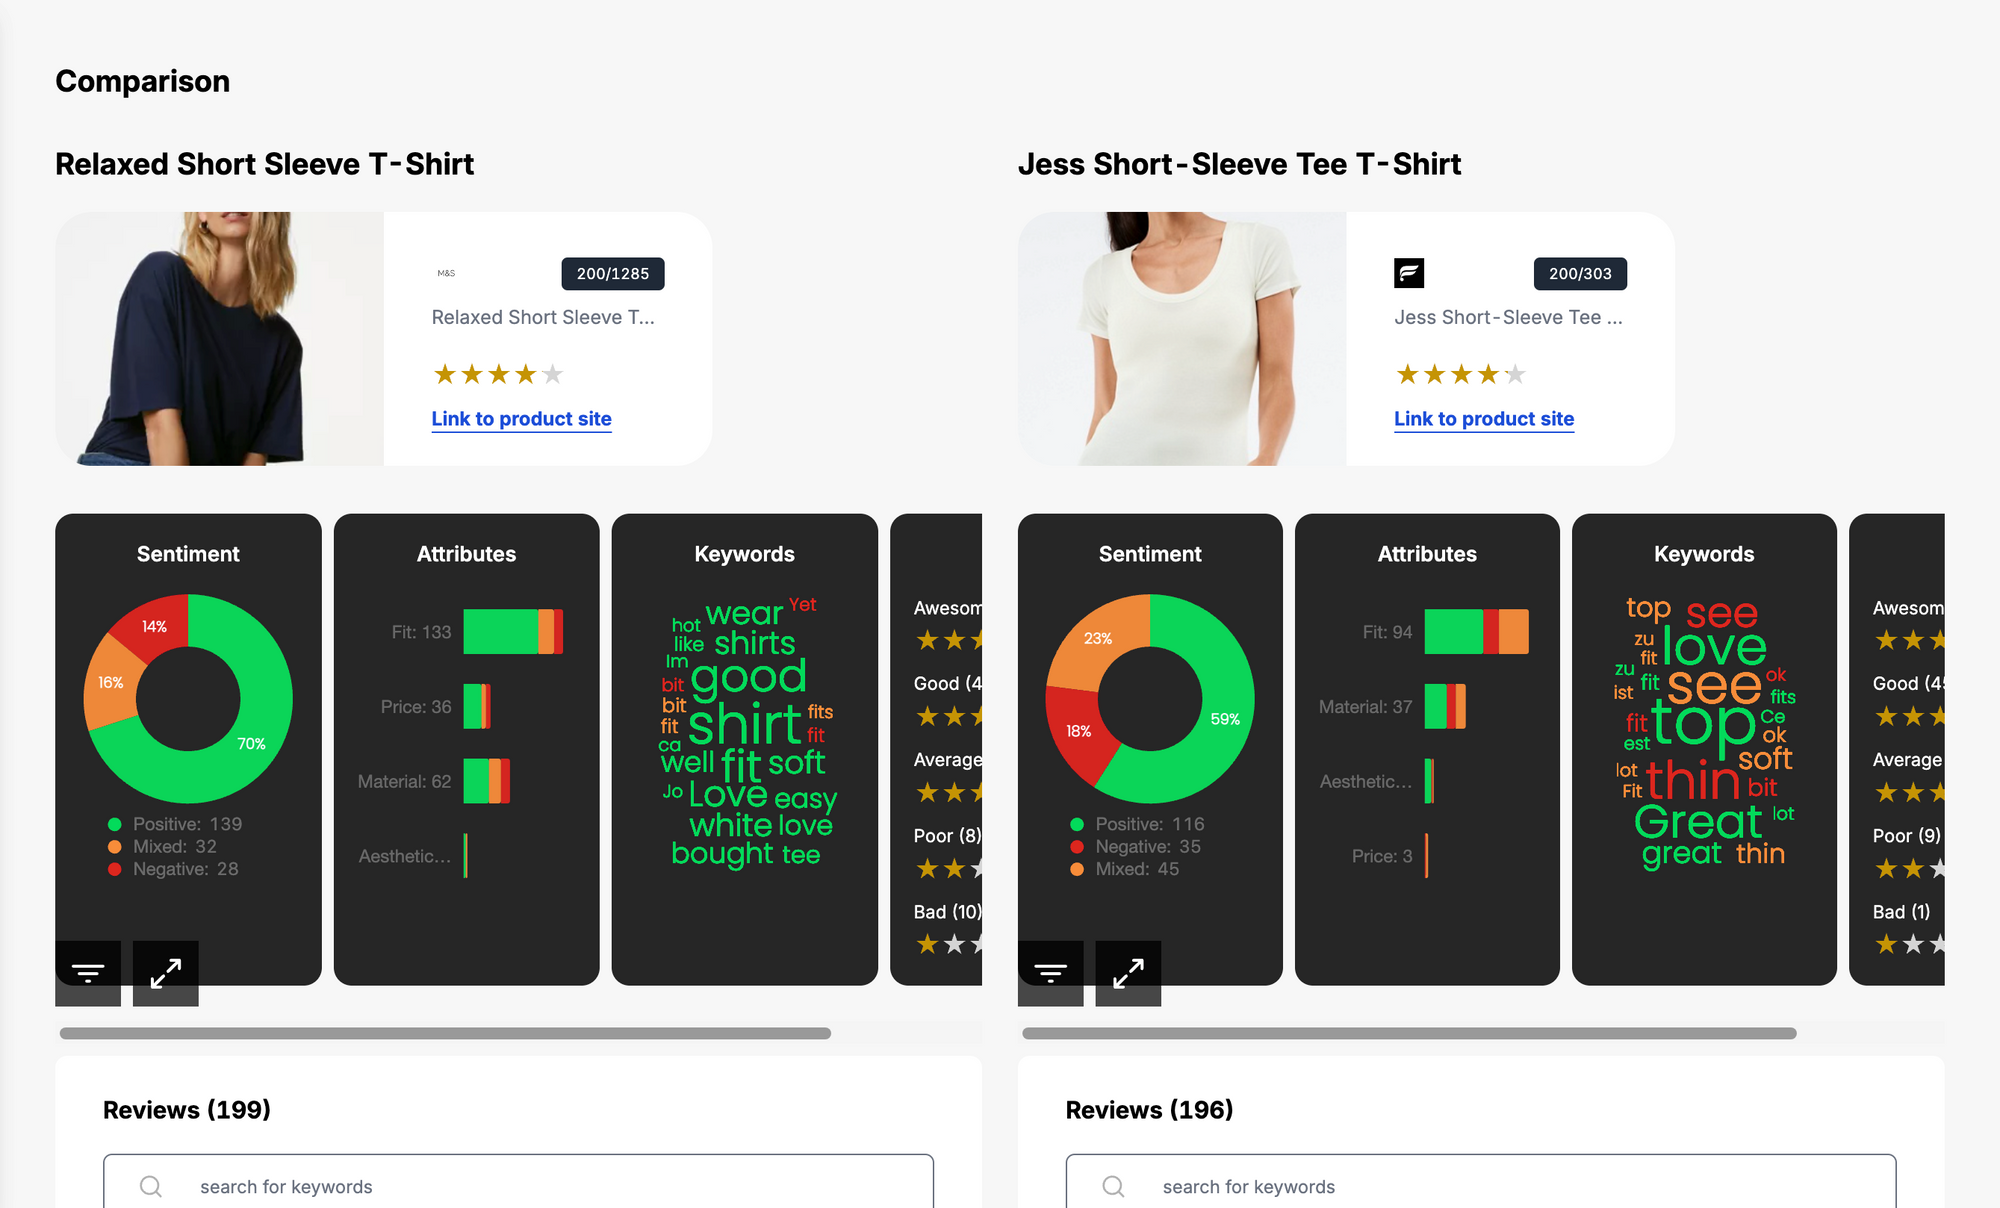 Beat the competition by leveraging insights from more than 40 million collected reviews of 2 million+ products from top fashion brands around the world, with Woven Insights